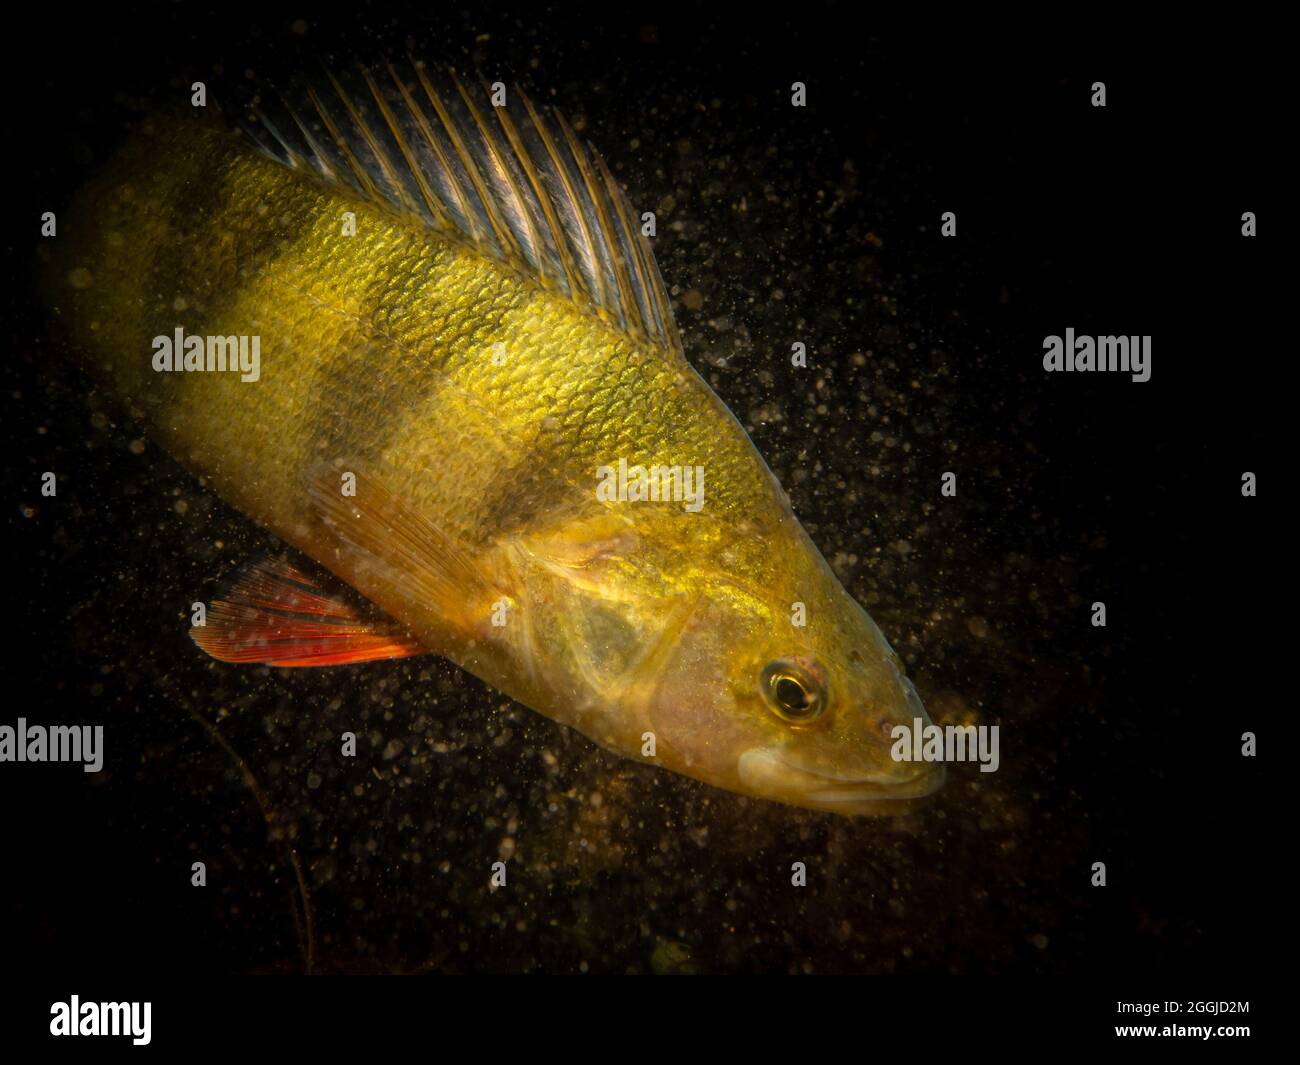 A close-up picture of a European perch, Perca fluviatilis, in cold Northern European waters. Black ocean background Stock Photo